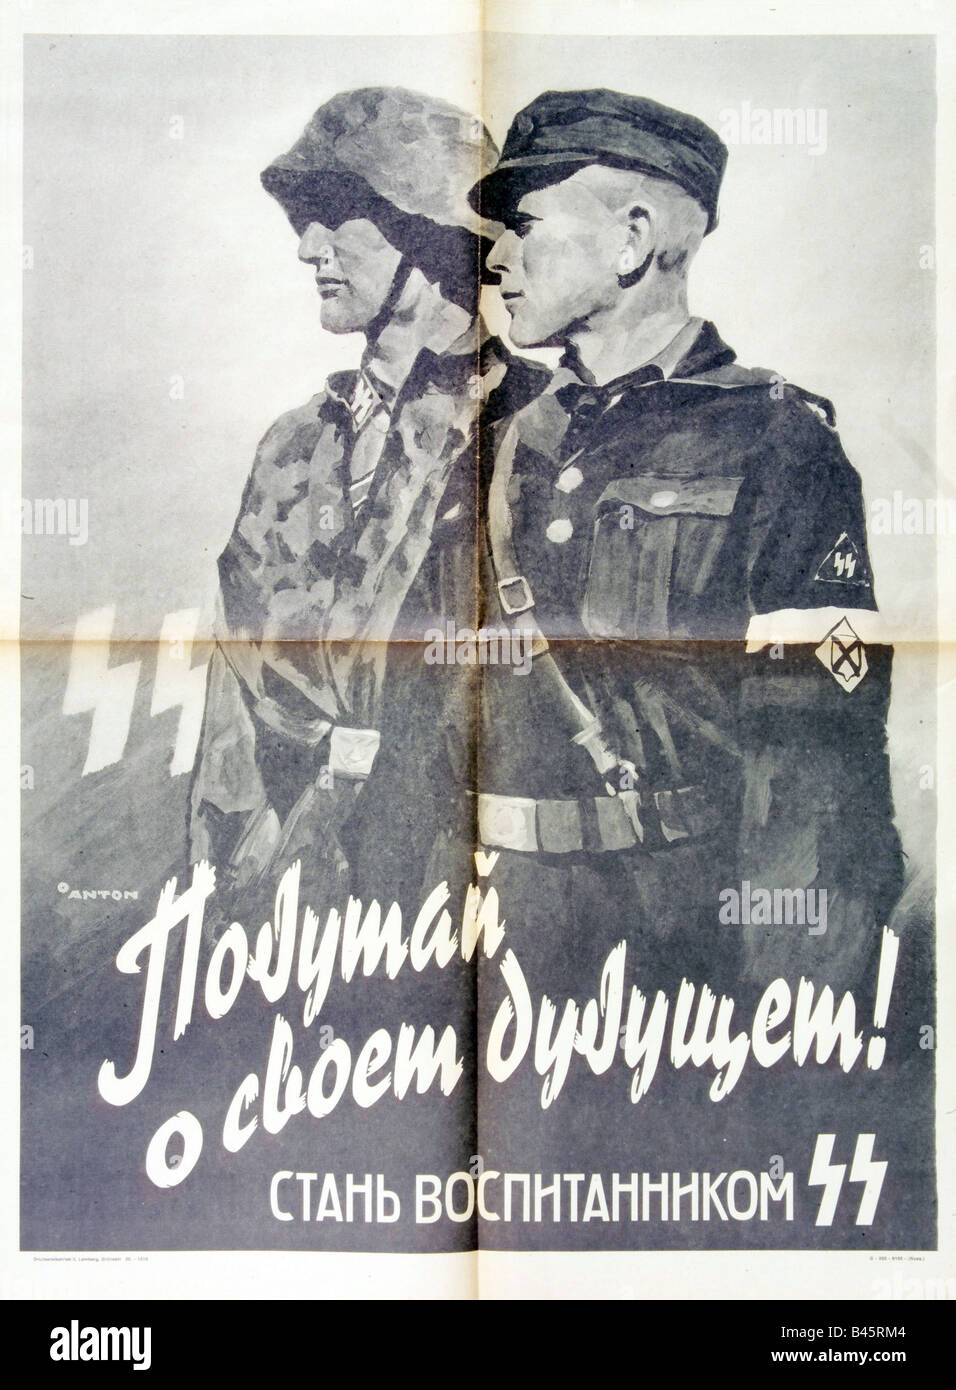 Nazism/National Socialism, organisations, Schutzstaffel (SS), Armed SS, recruiting poster in Cyrillic letters, Lviv circa 1943, , Stock Photo